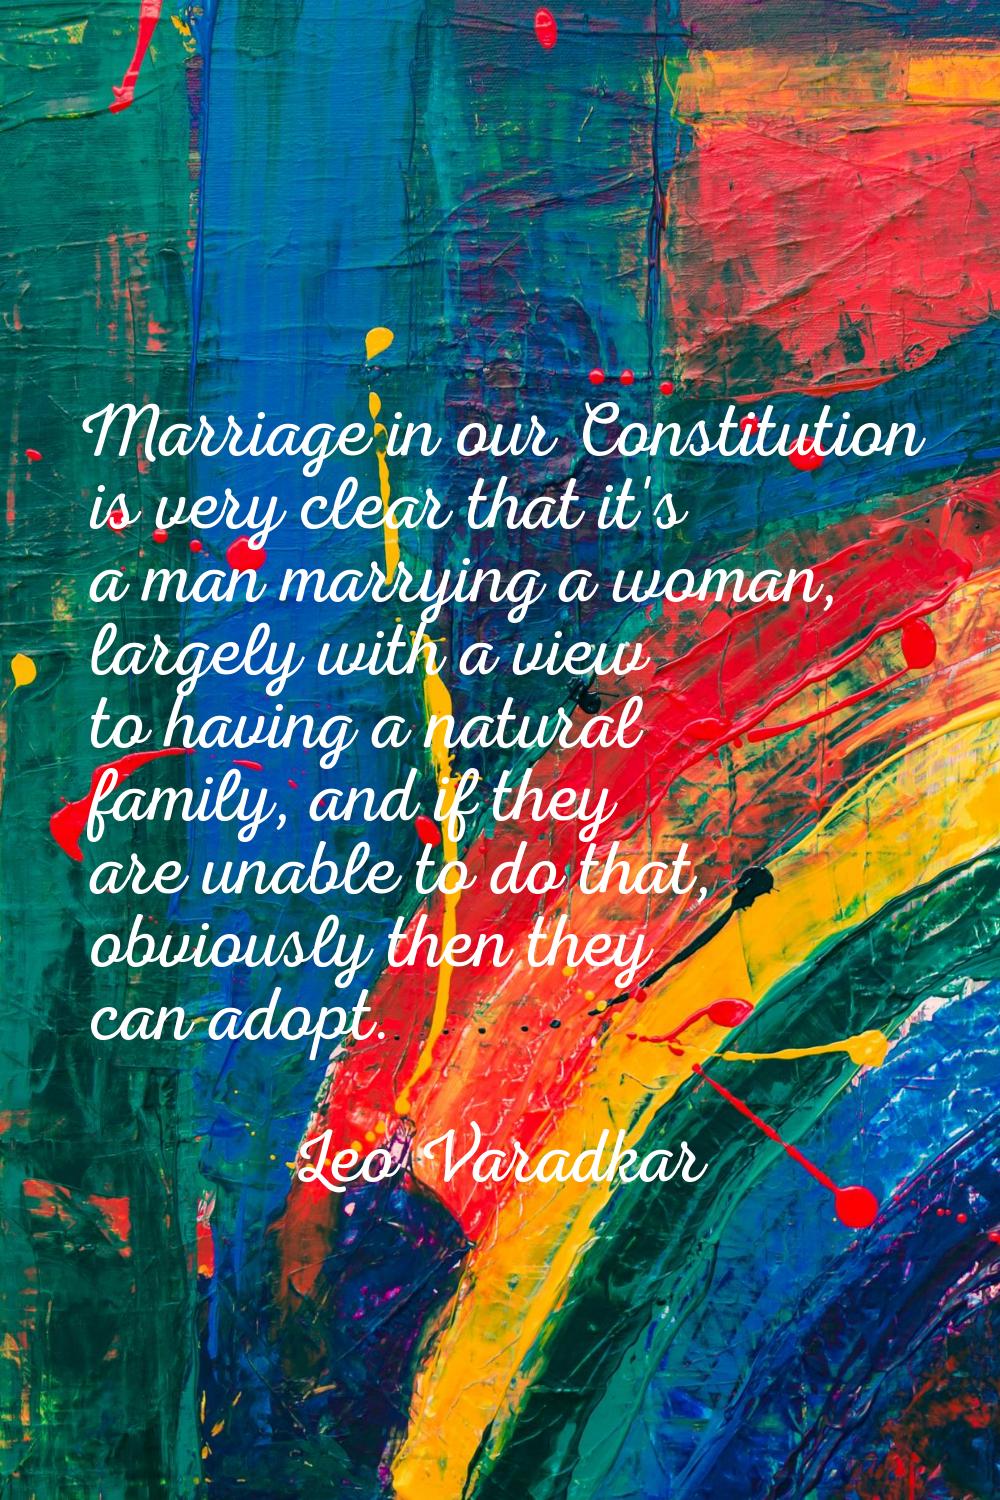 Marriage in our Constitution is very clear that it's a man marrying a woman, largely with a view to